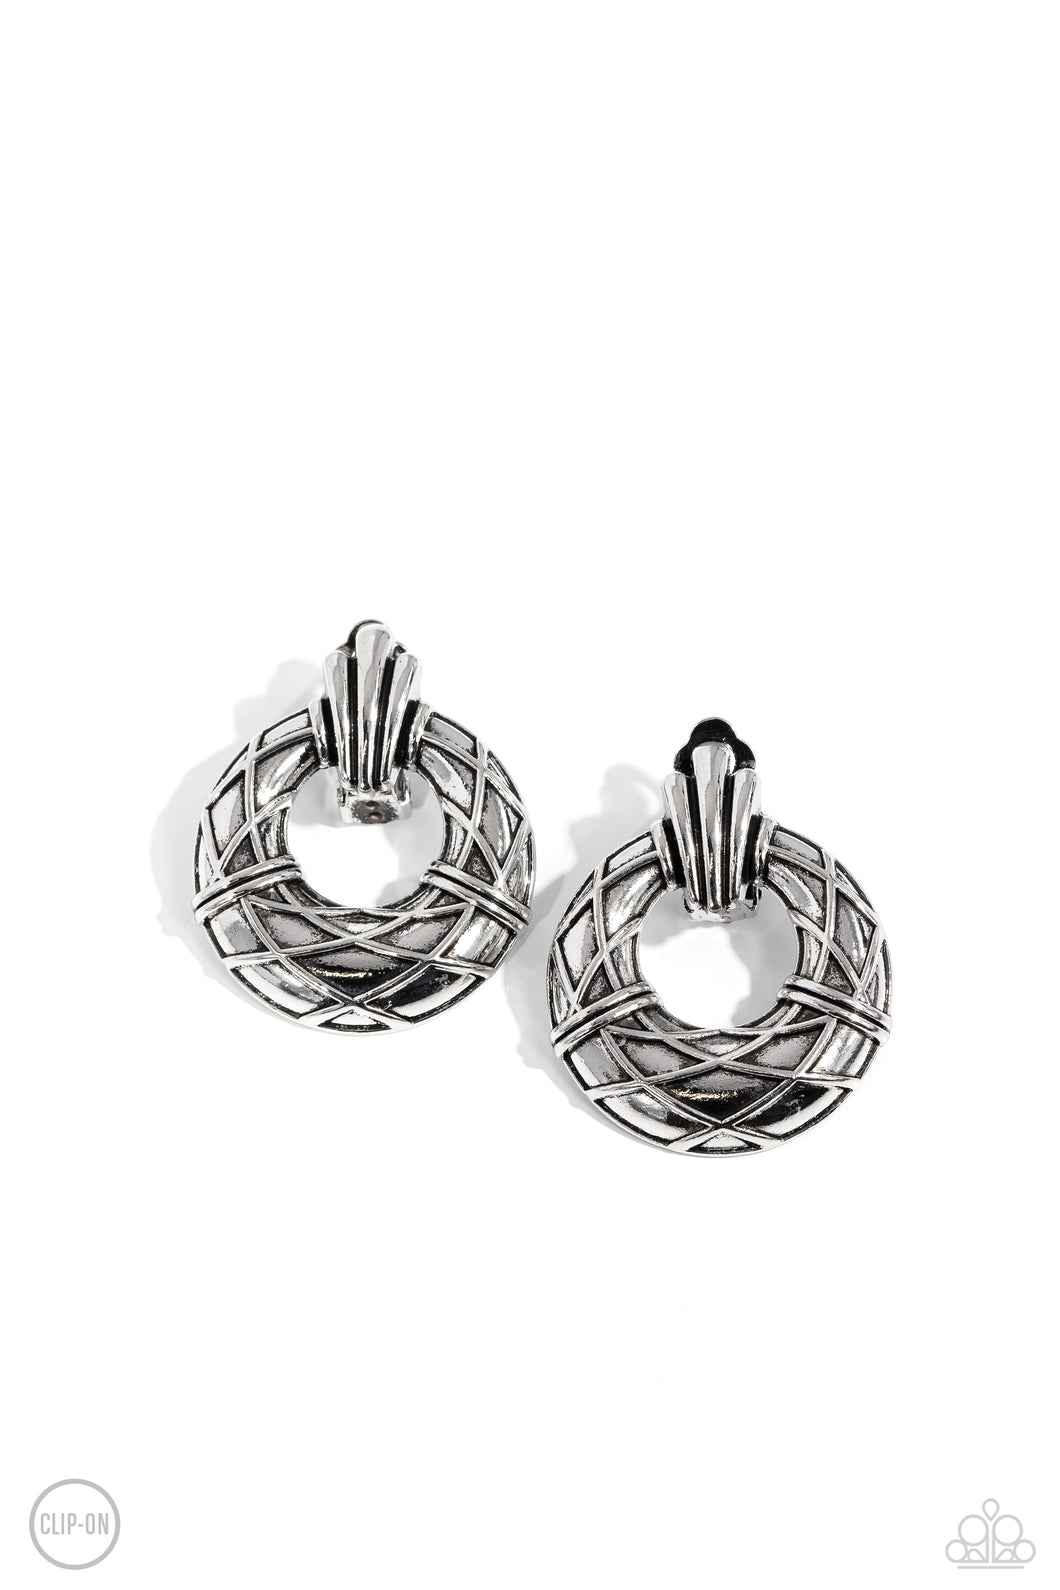 Metro Voyage - Silver (Clip-On) Earring